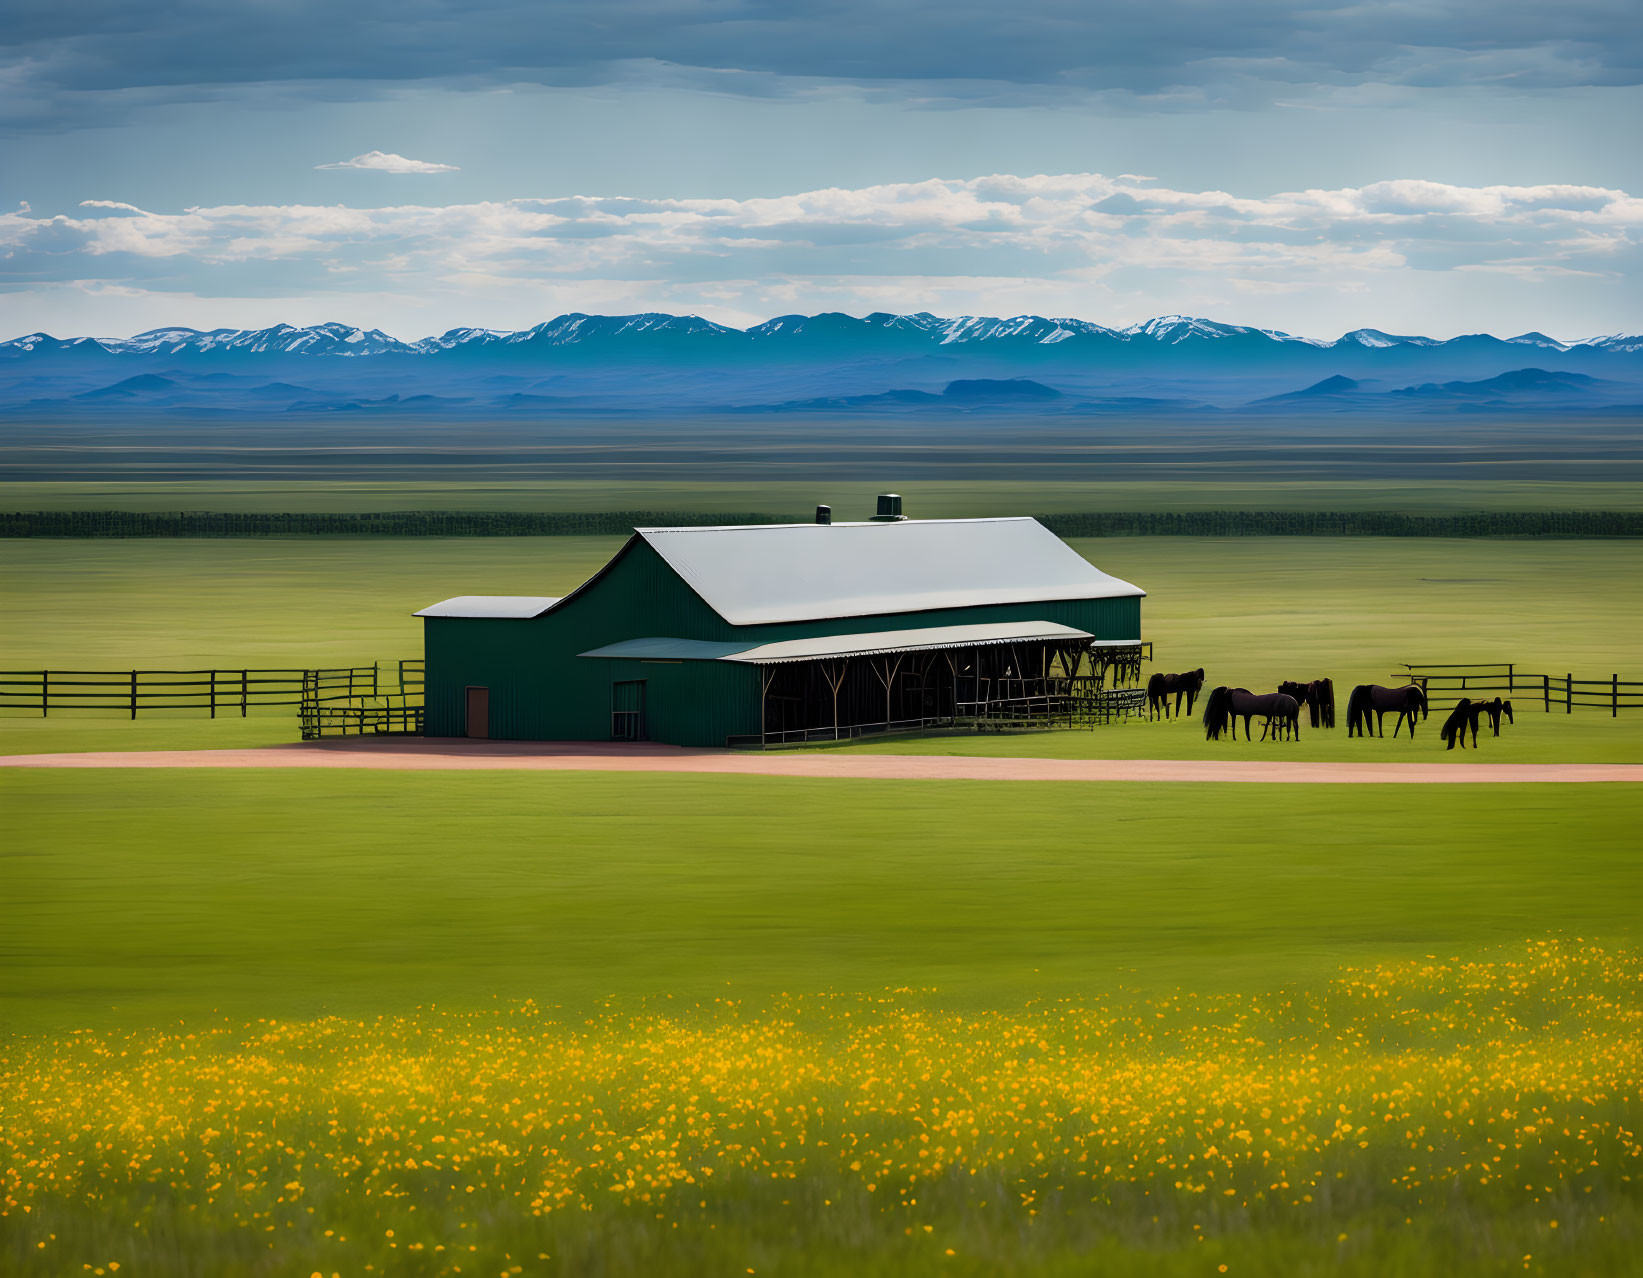 Rural landscape with green barn, horses, and mountain range